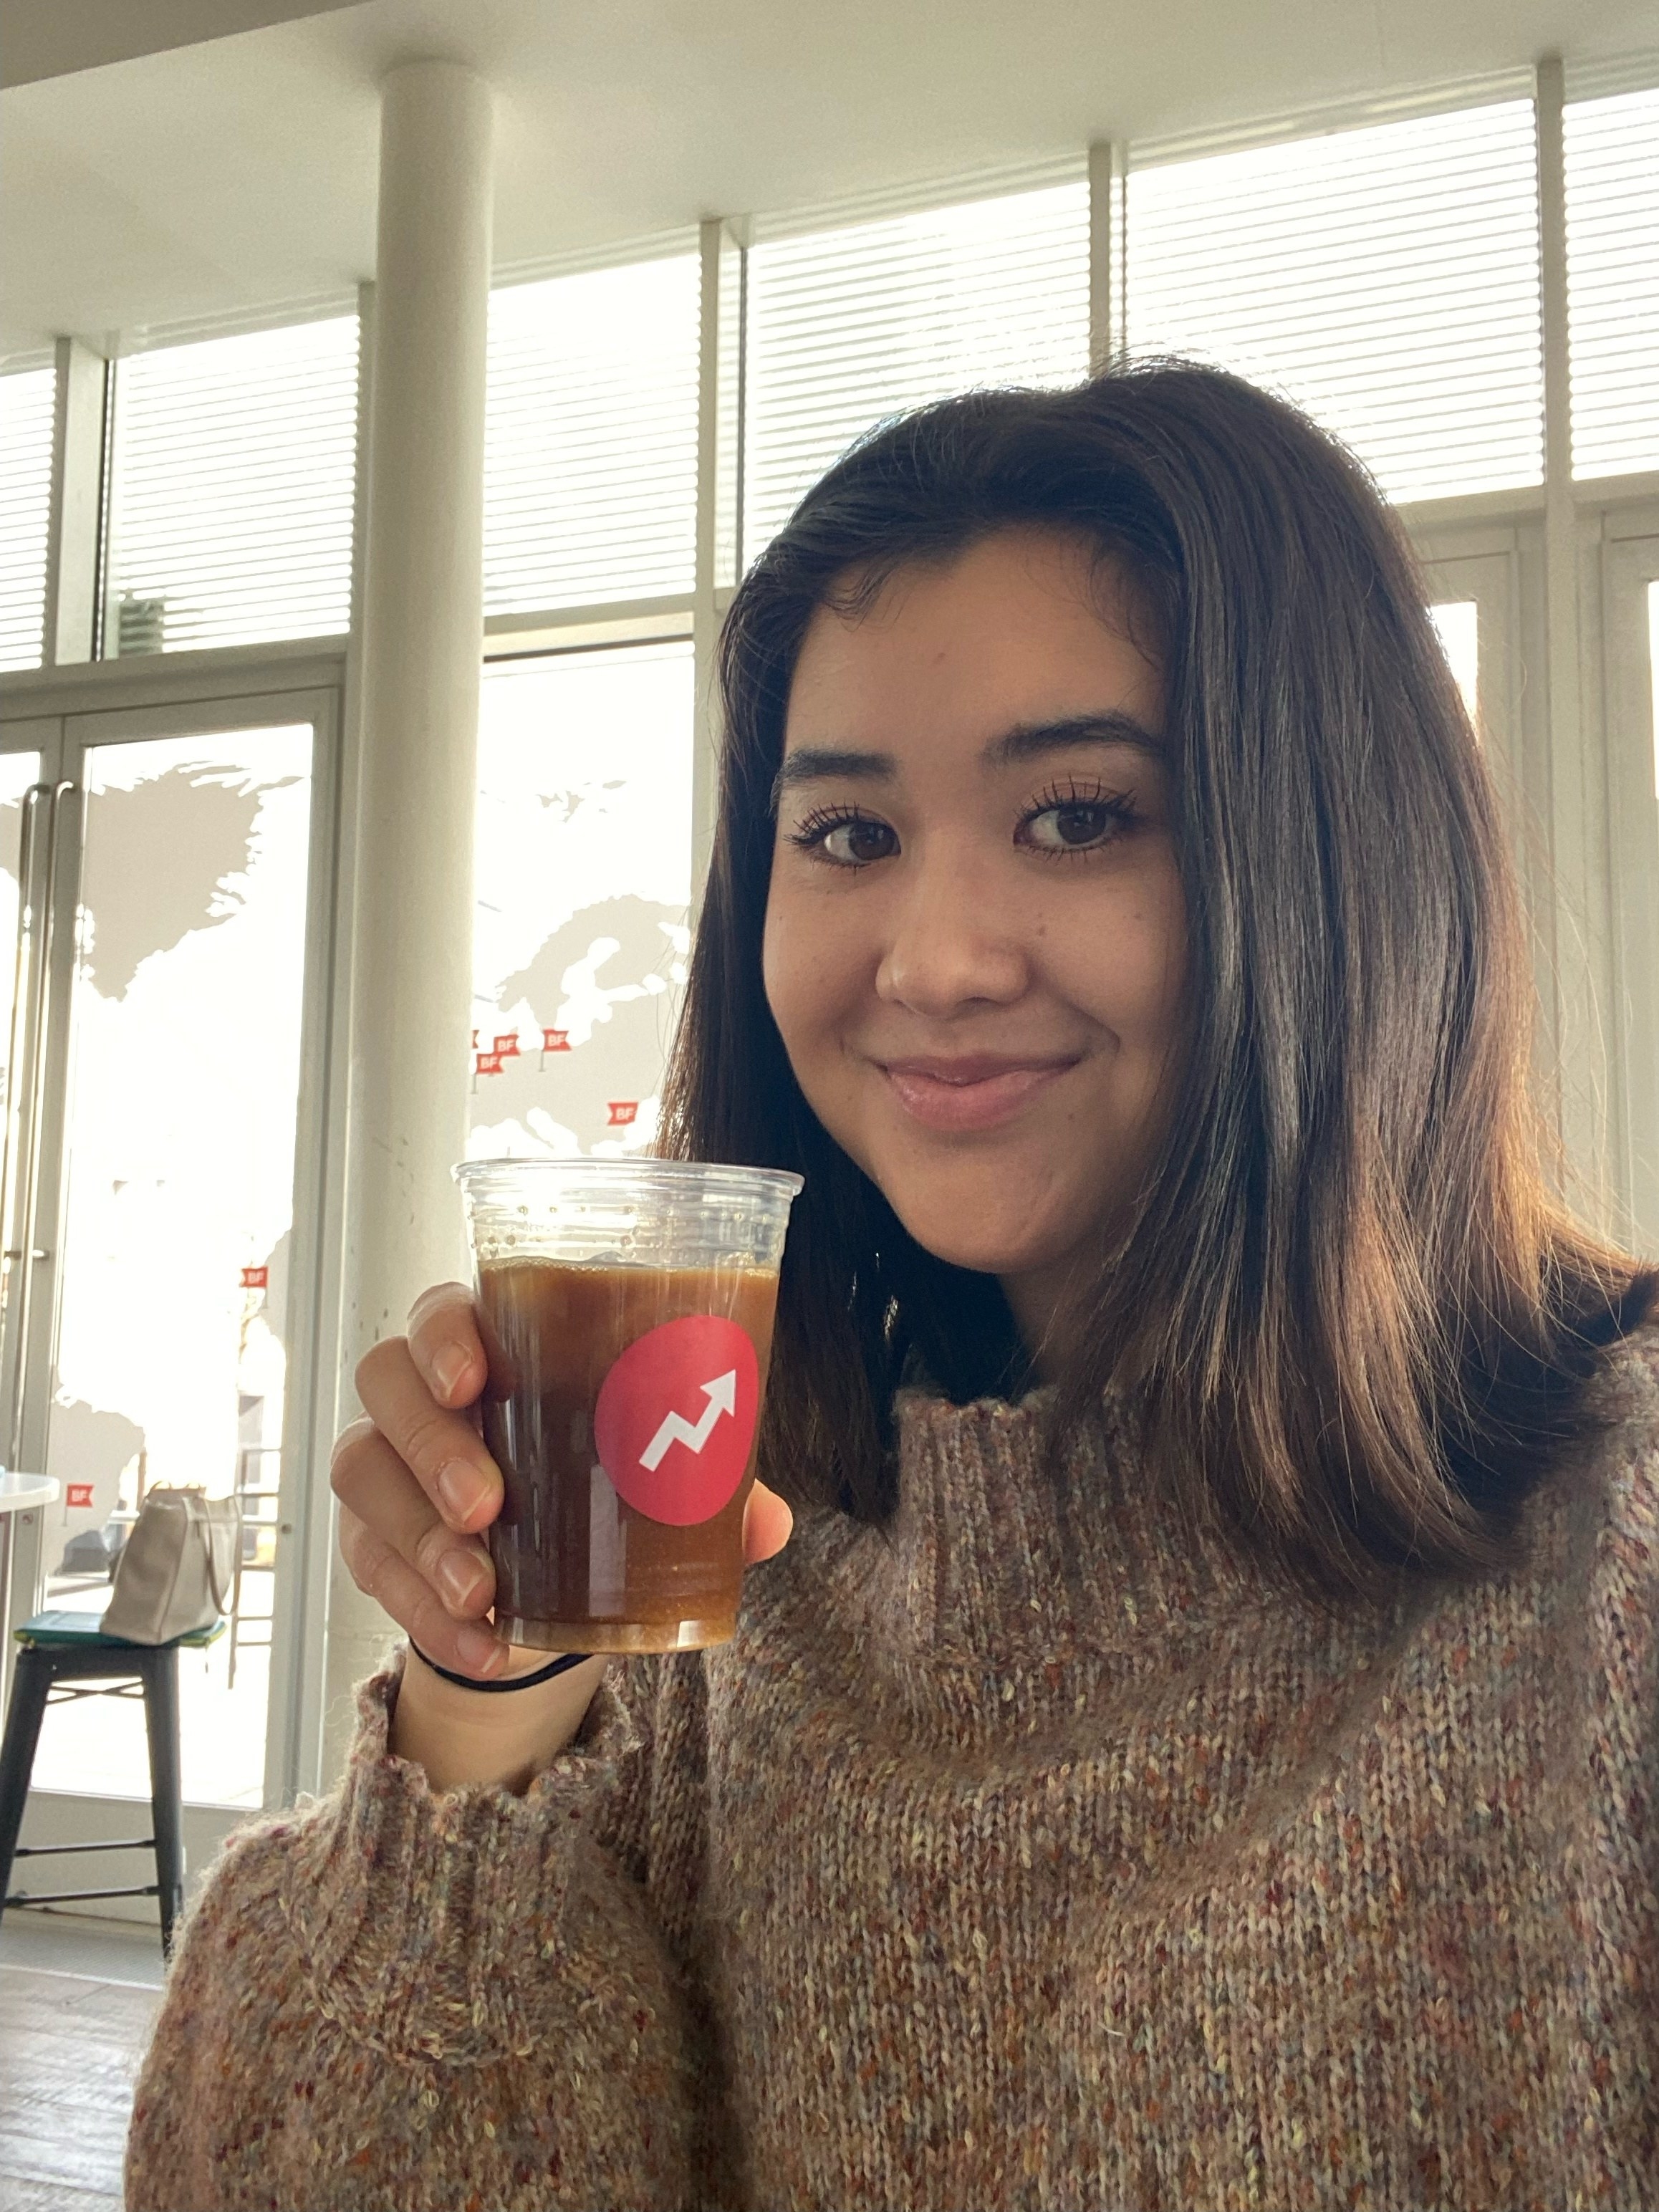 A smiling woman wearing a mock turtleneck sweater holds a plastic cup of coffee